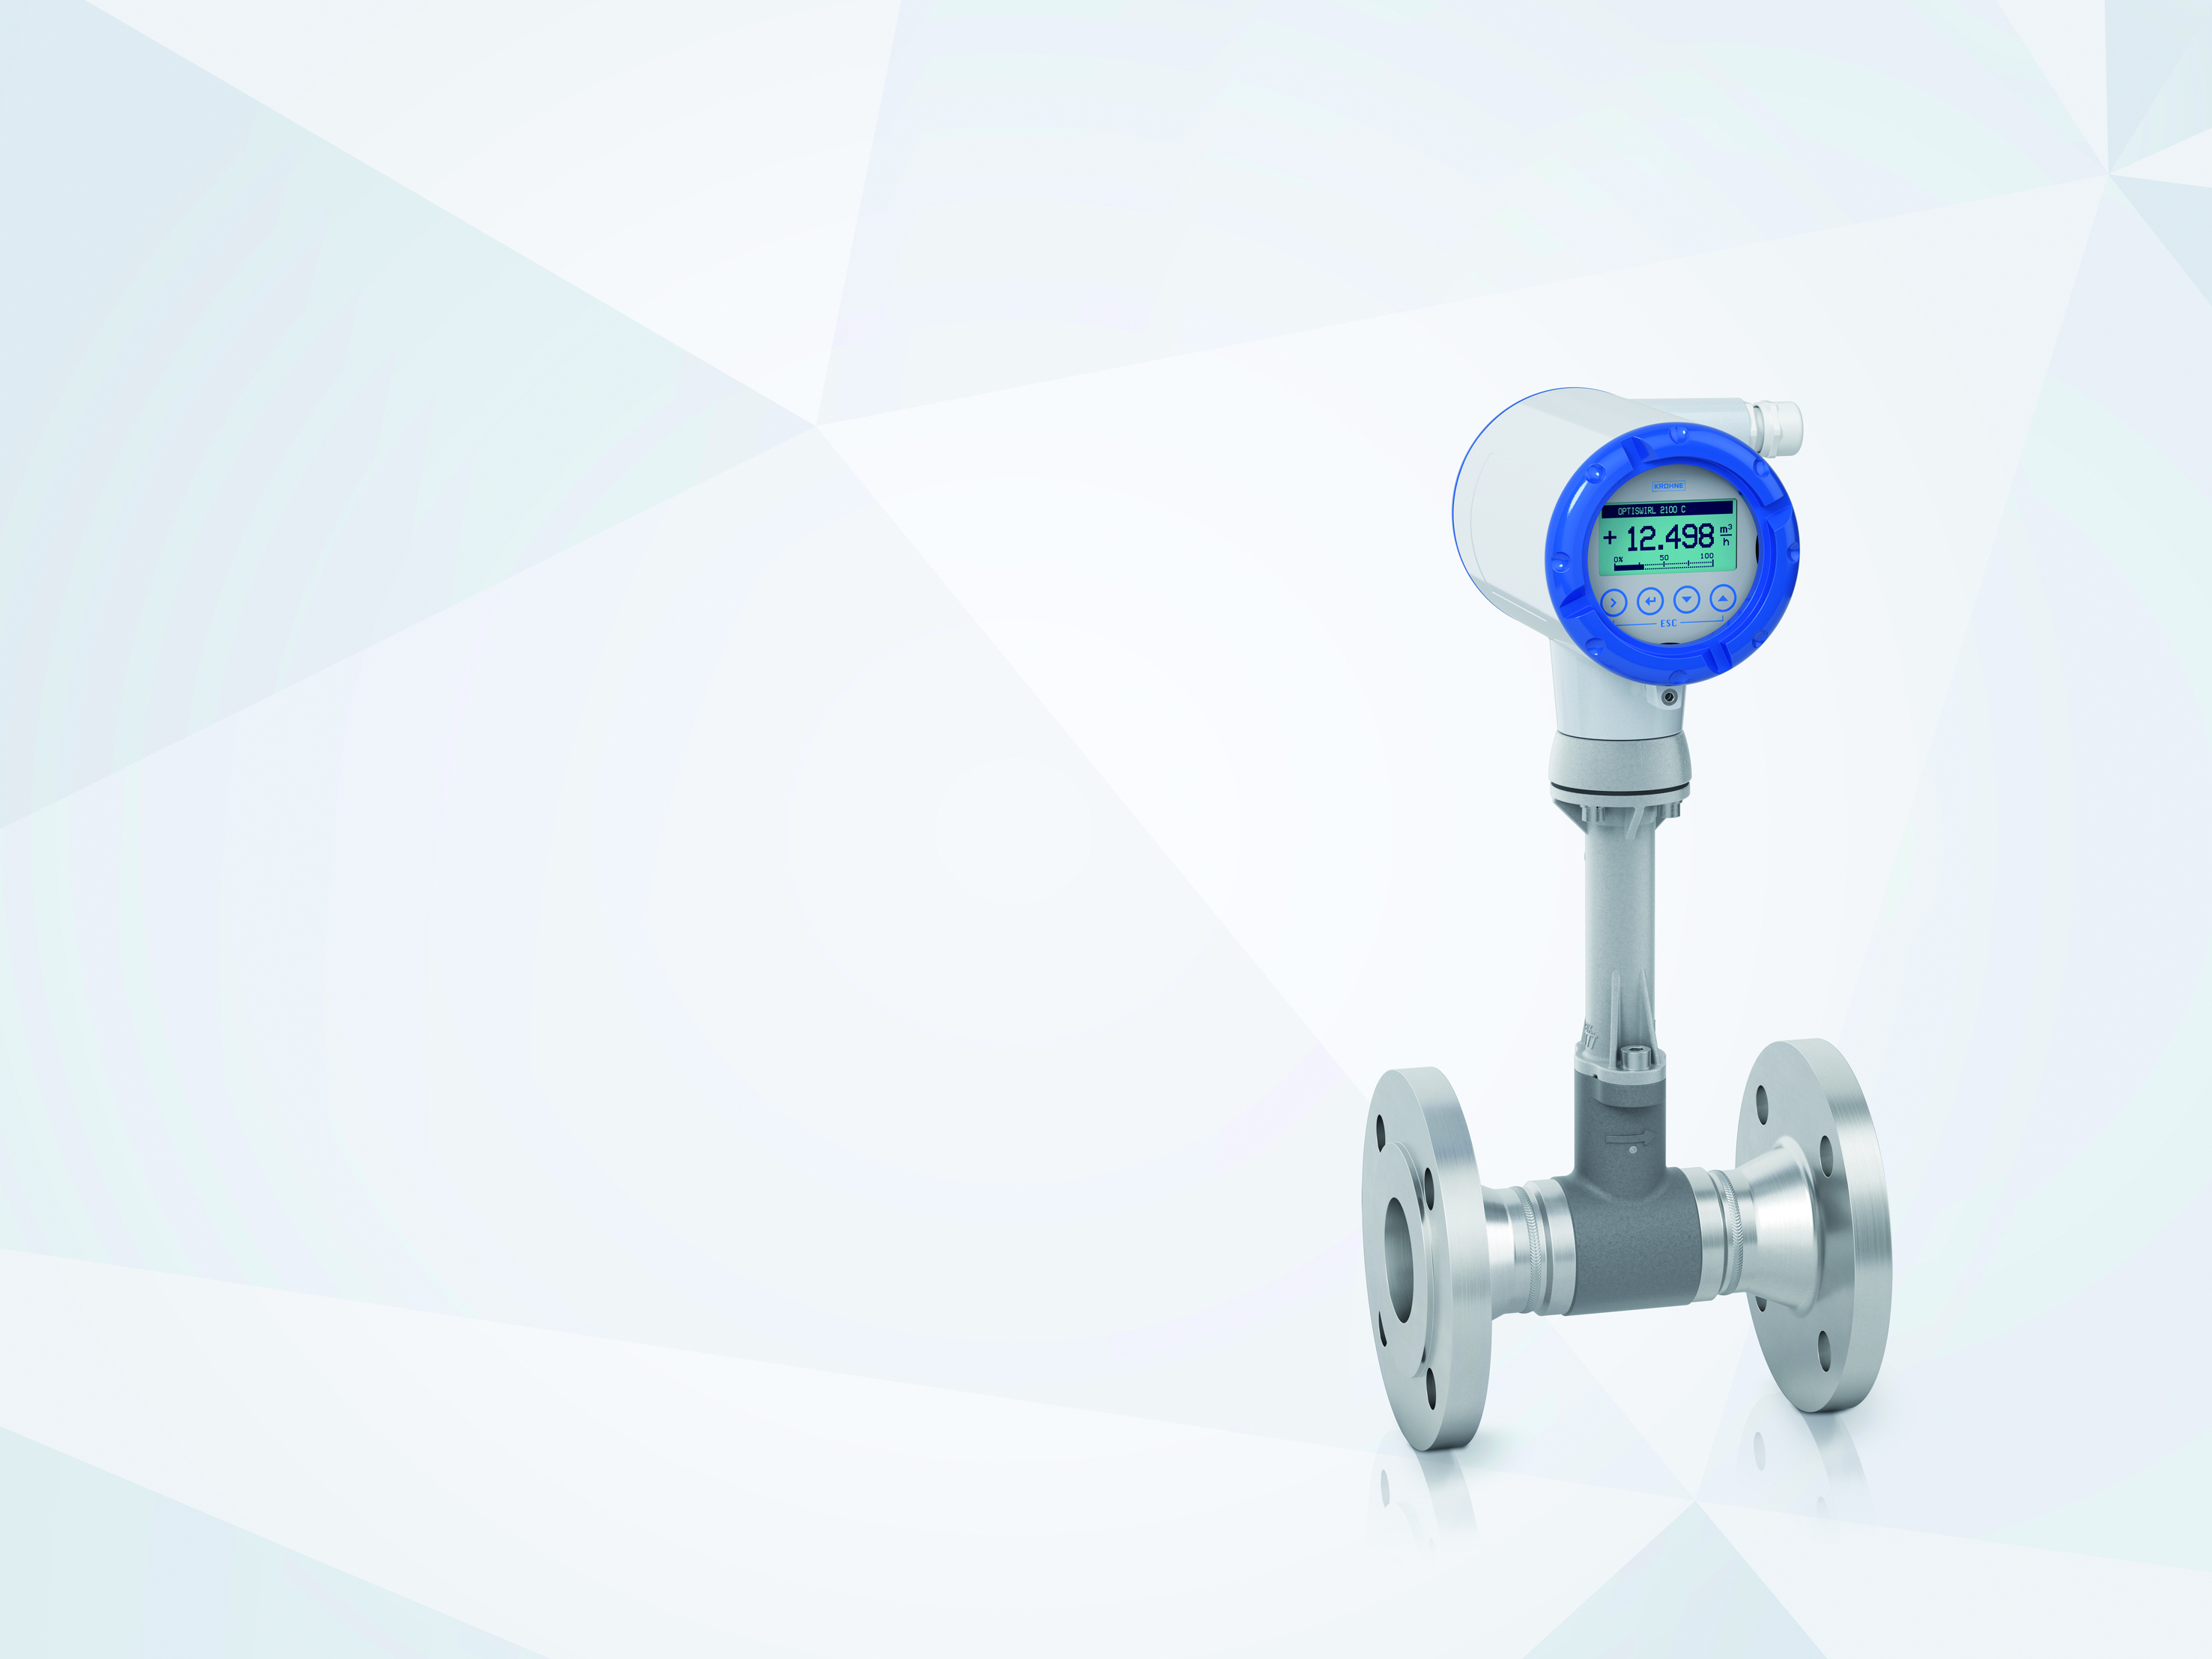 The OPTISWIRL 2100 is designed for basic utility applications in the process industries for the measurement of liquids and wet gases.